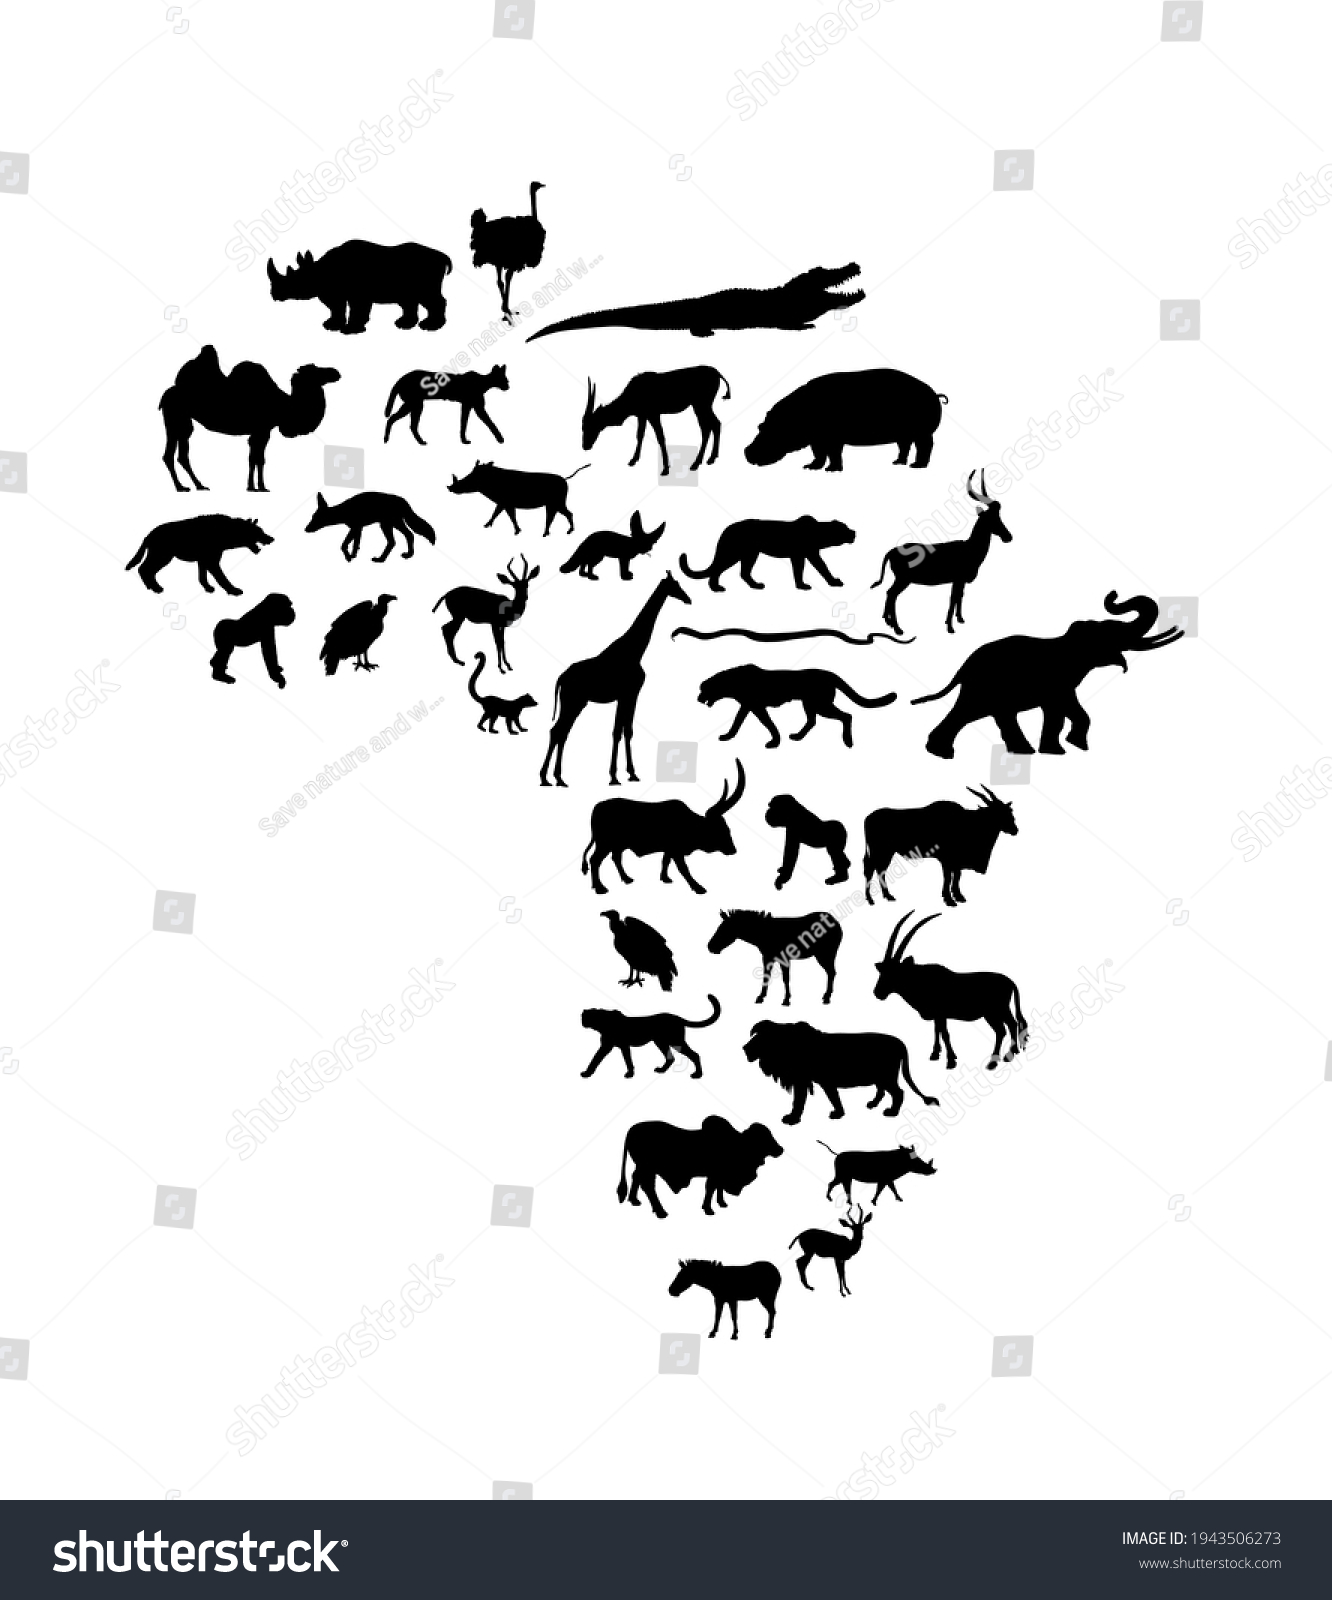 Continent Map Africa Vector Silhouette Wild Stock Vector Royalty Free 1943506273 Shutterstock 6656